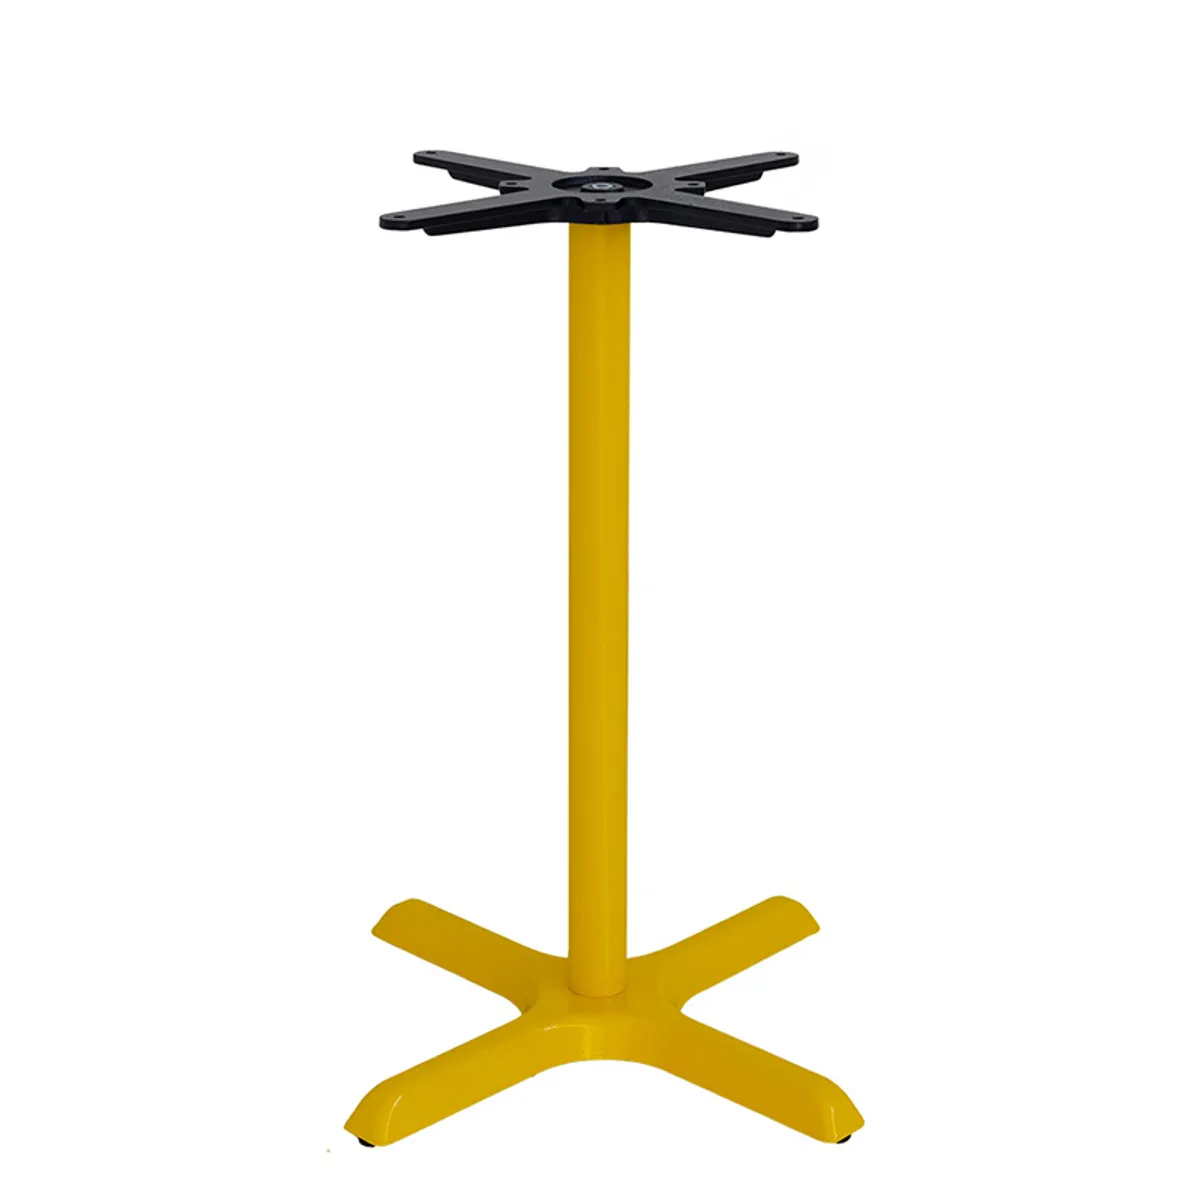 Dynamo Table Base In Ral Colour Yellow Suitable For Outdoor And Indoor Use